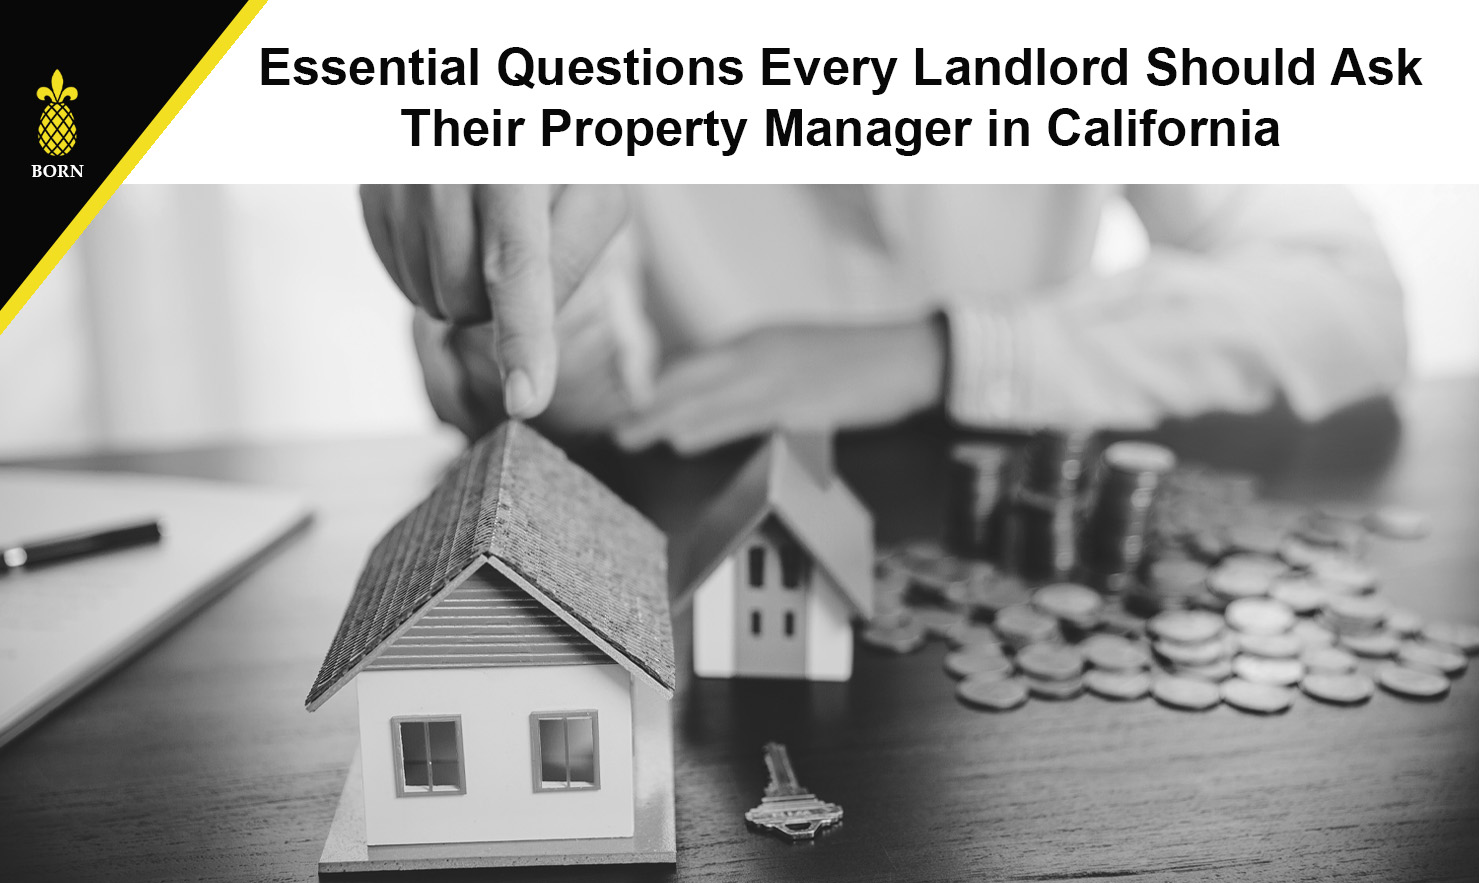 Essential Questions Every Landlord Should Ask Their Property Manager in California